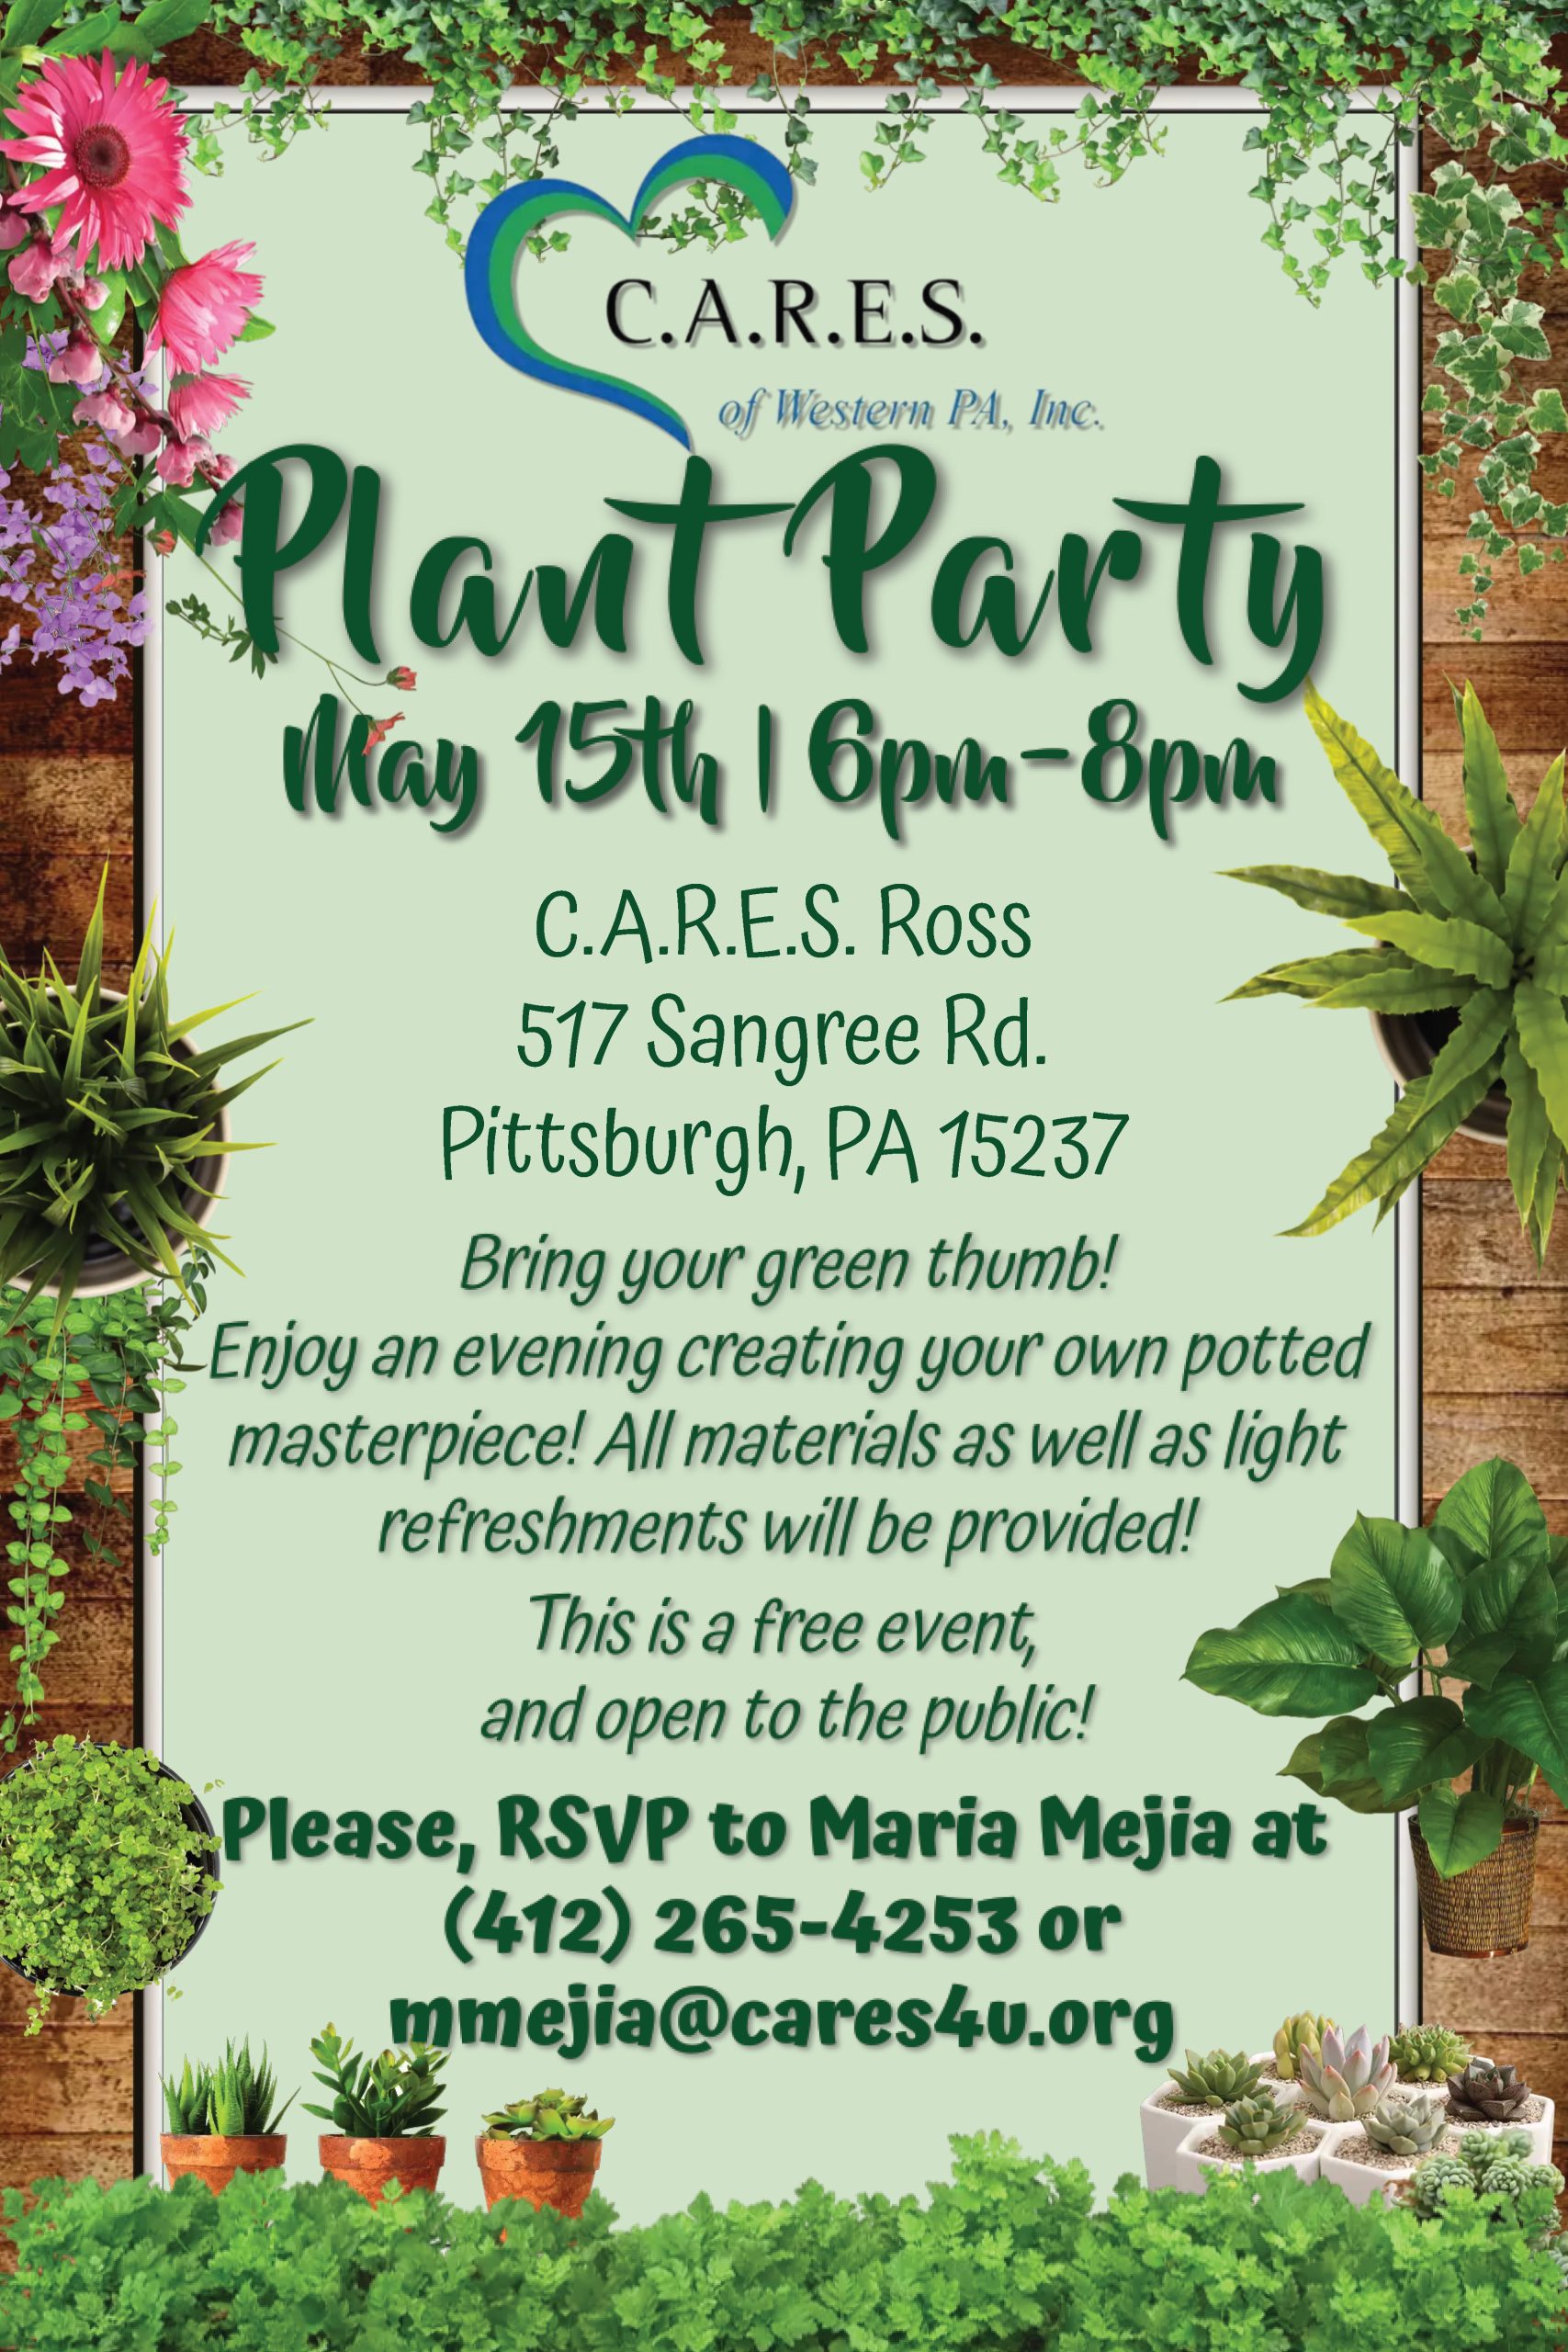 C.A.R.E.S. Plant Party - Pittsburgh 10